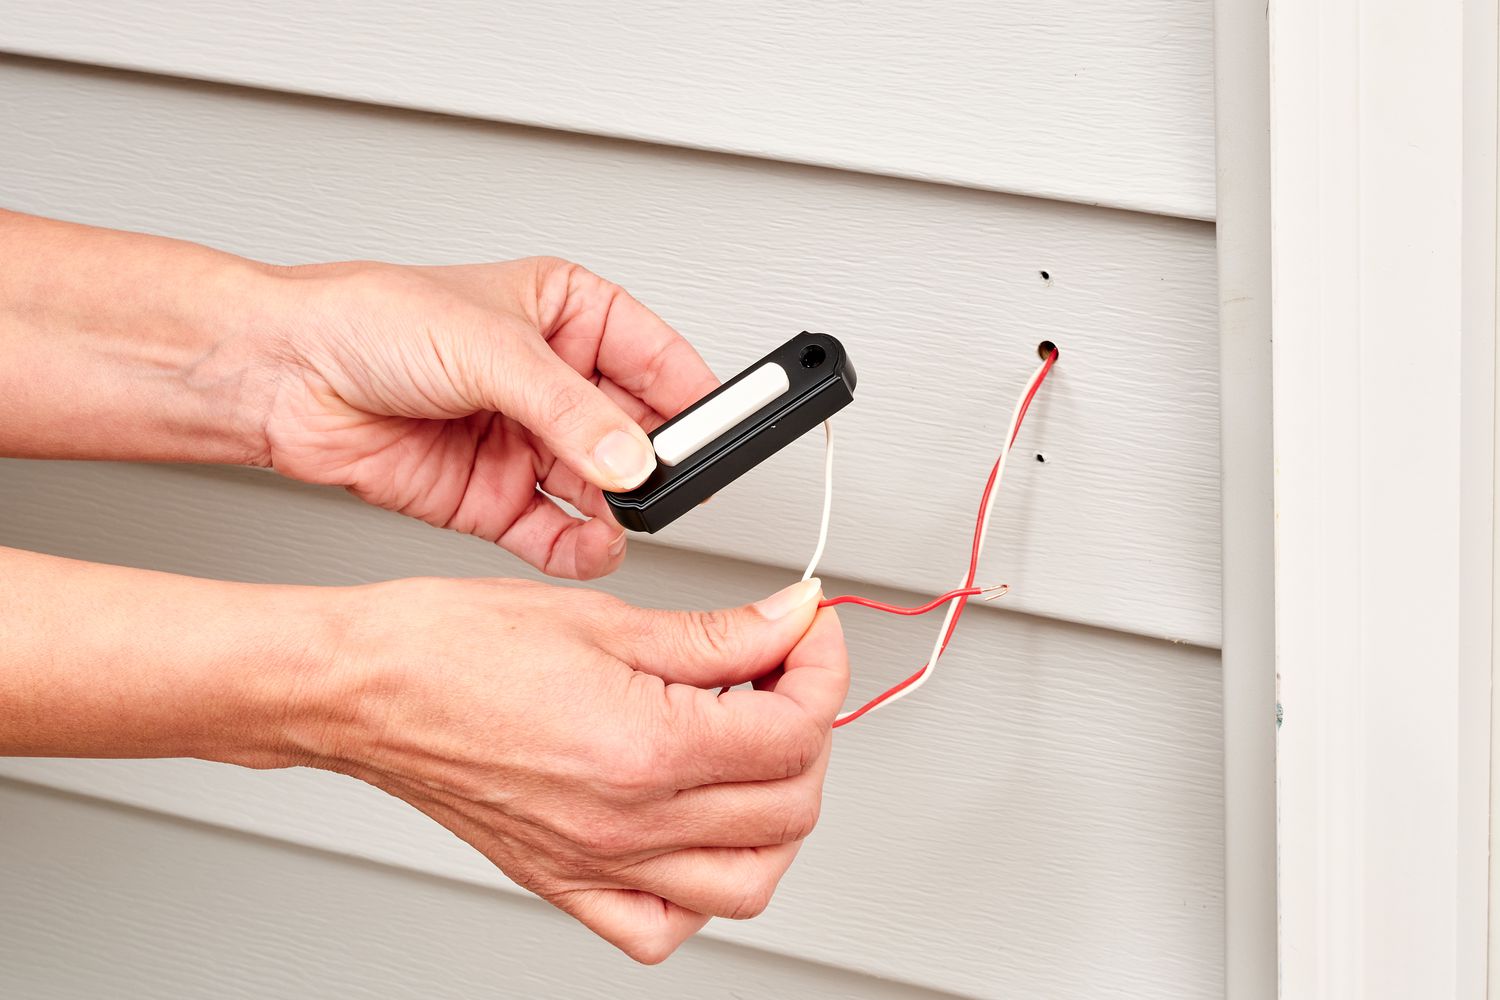 How To Replace Wired Doorbell